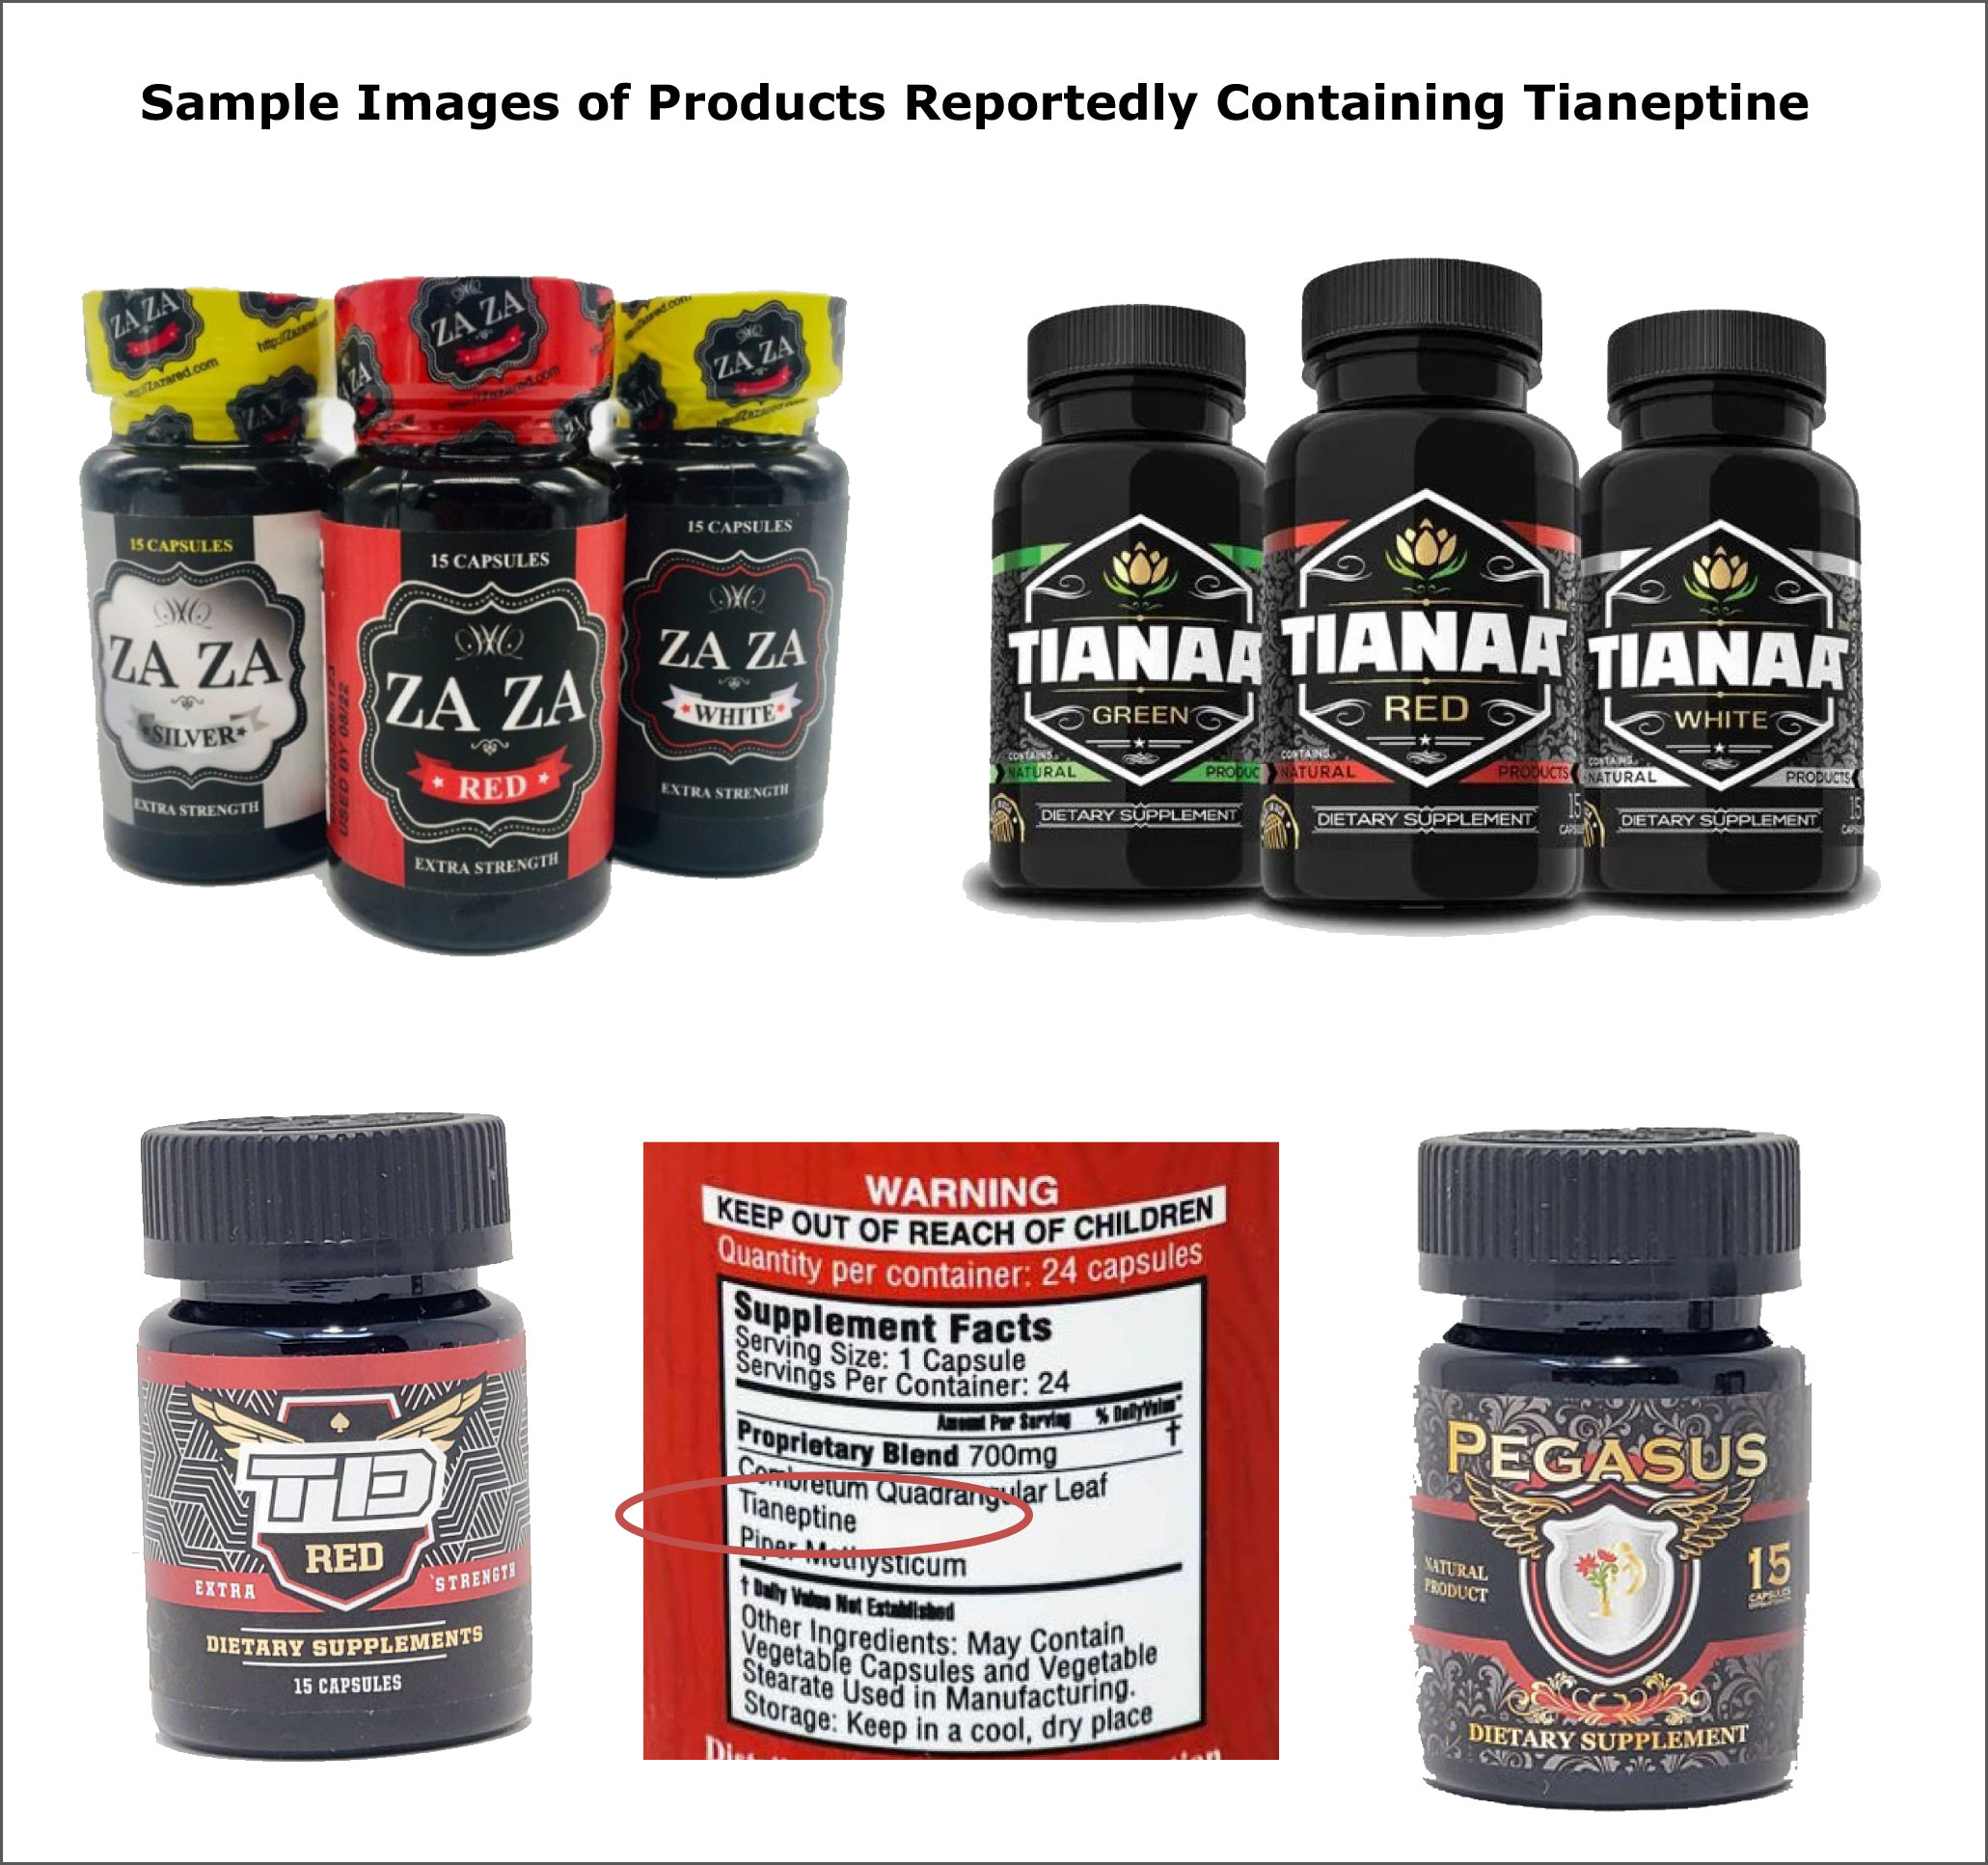 Sample images of products reportedly containing tianeptine